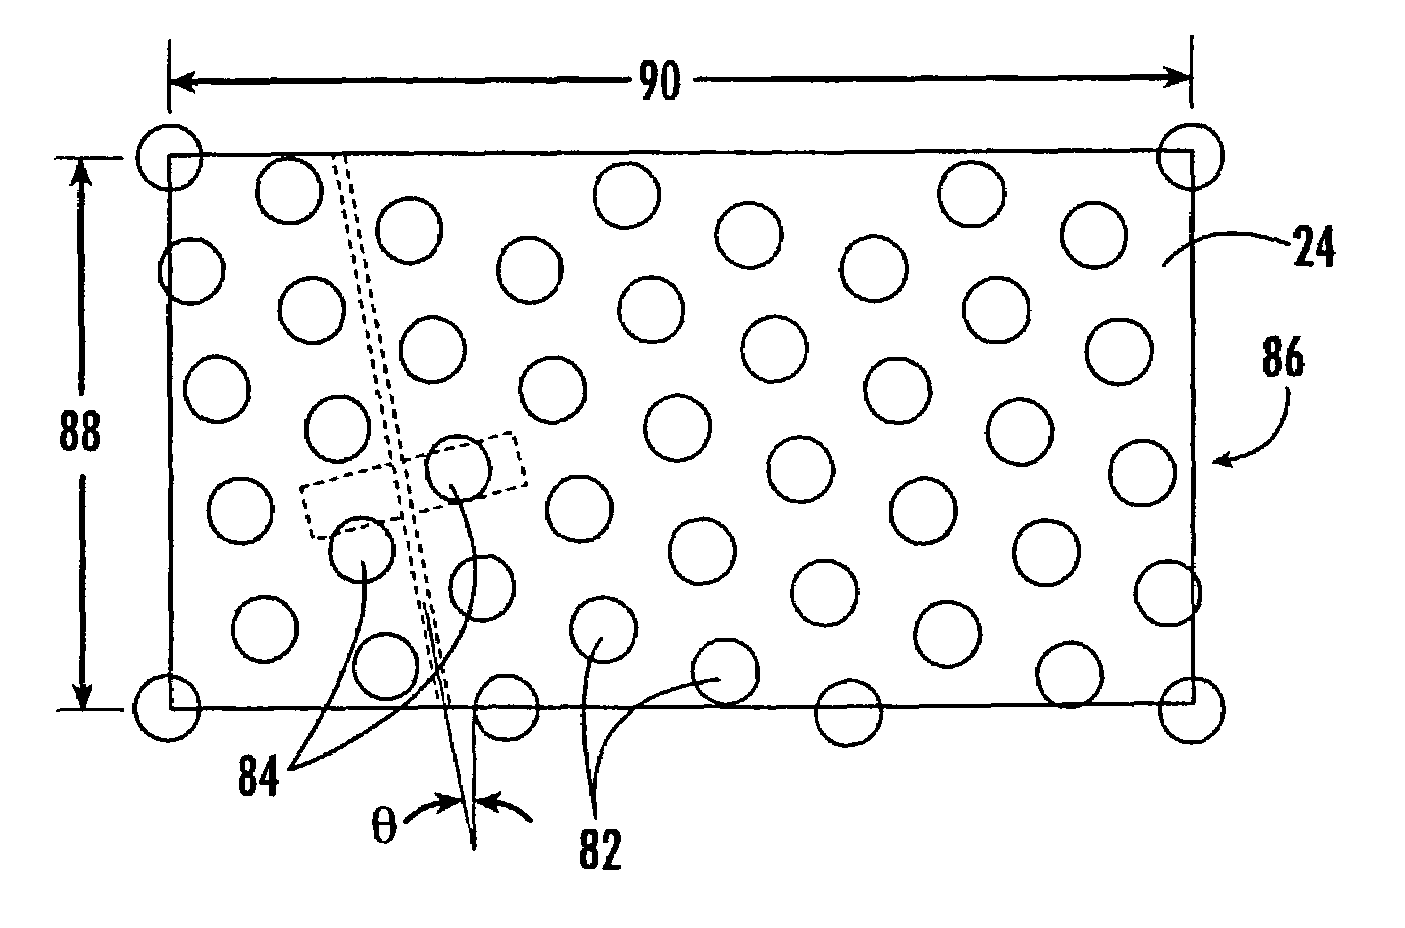 Suction roll with sensors for detecting temperature and/or pressure